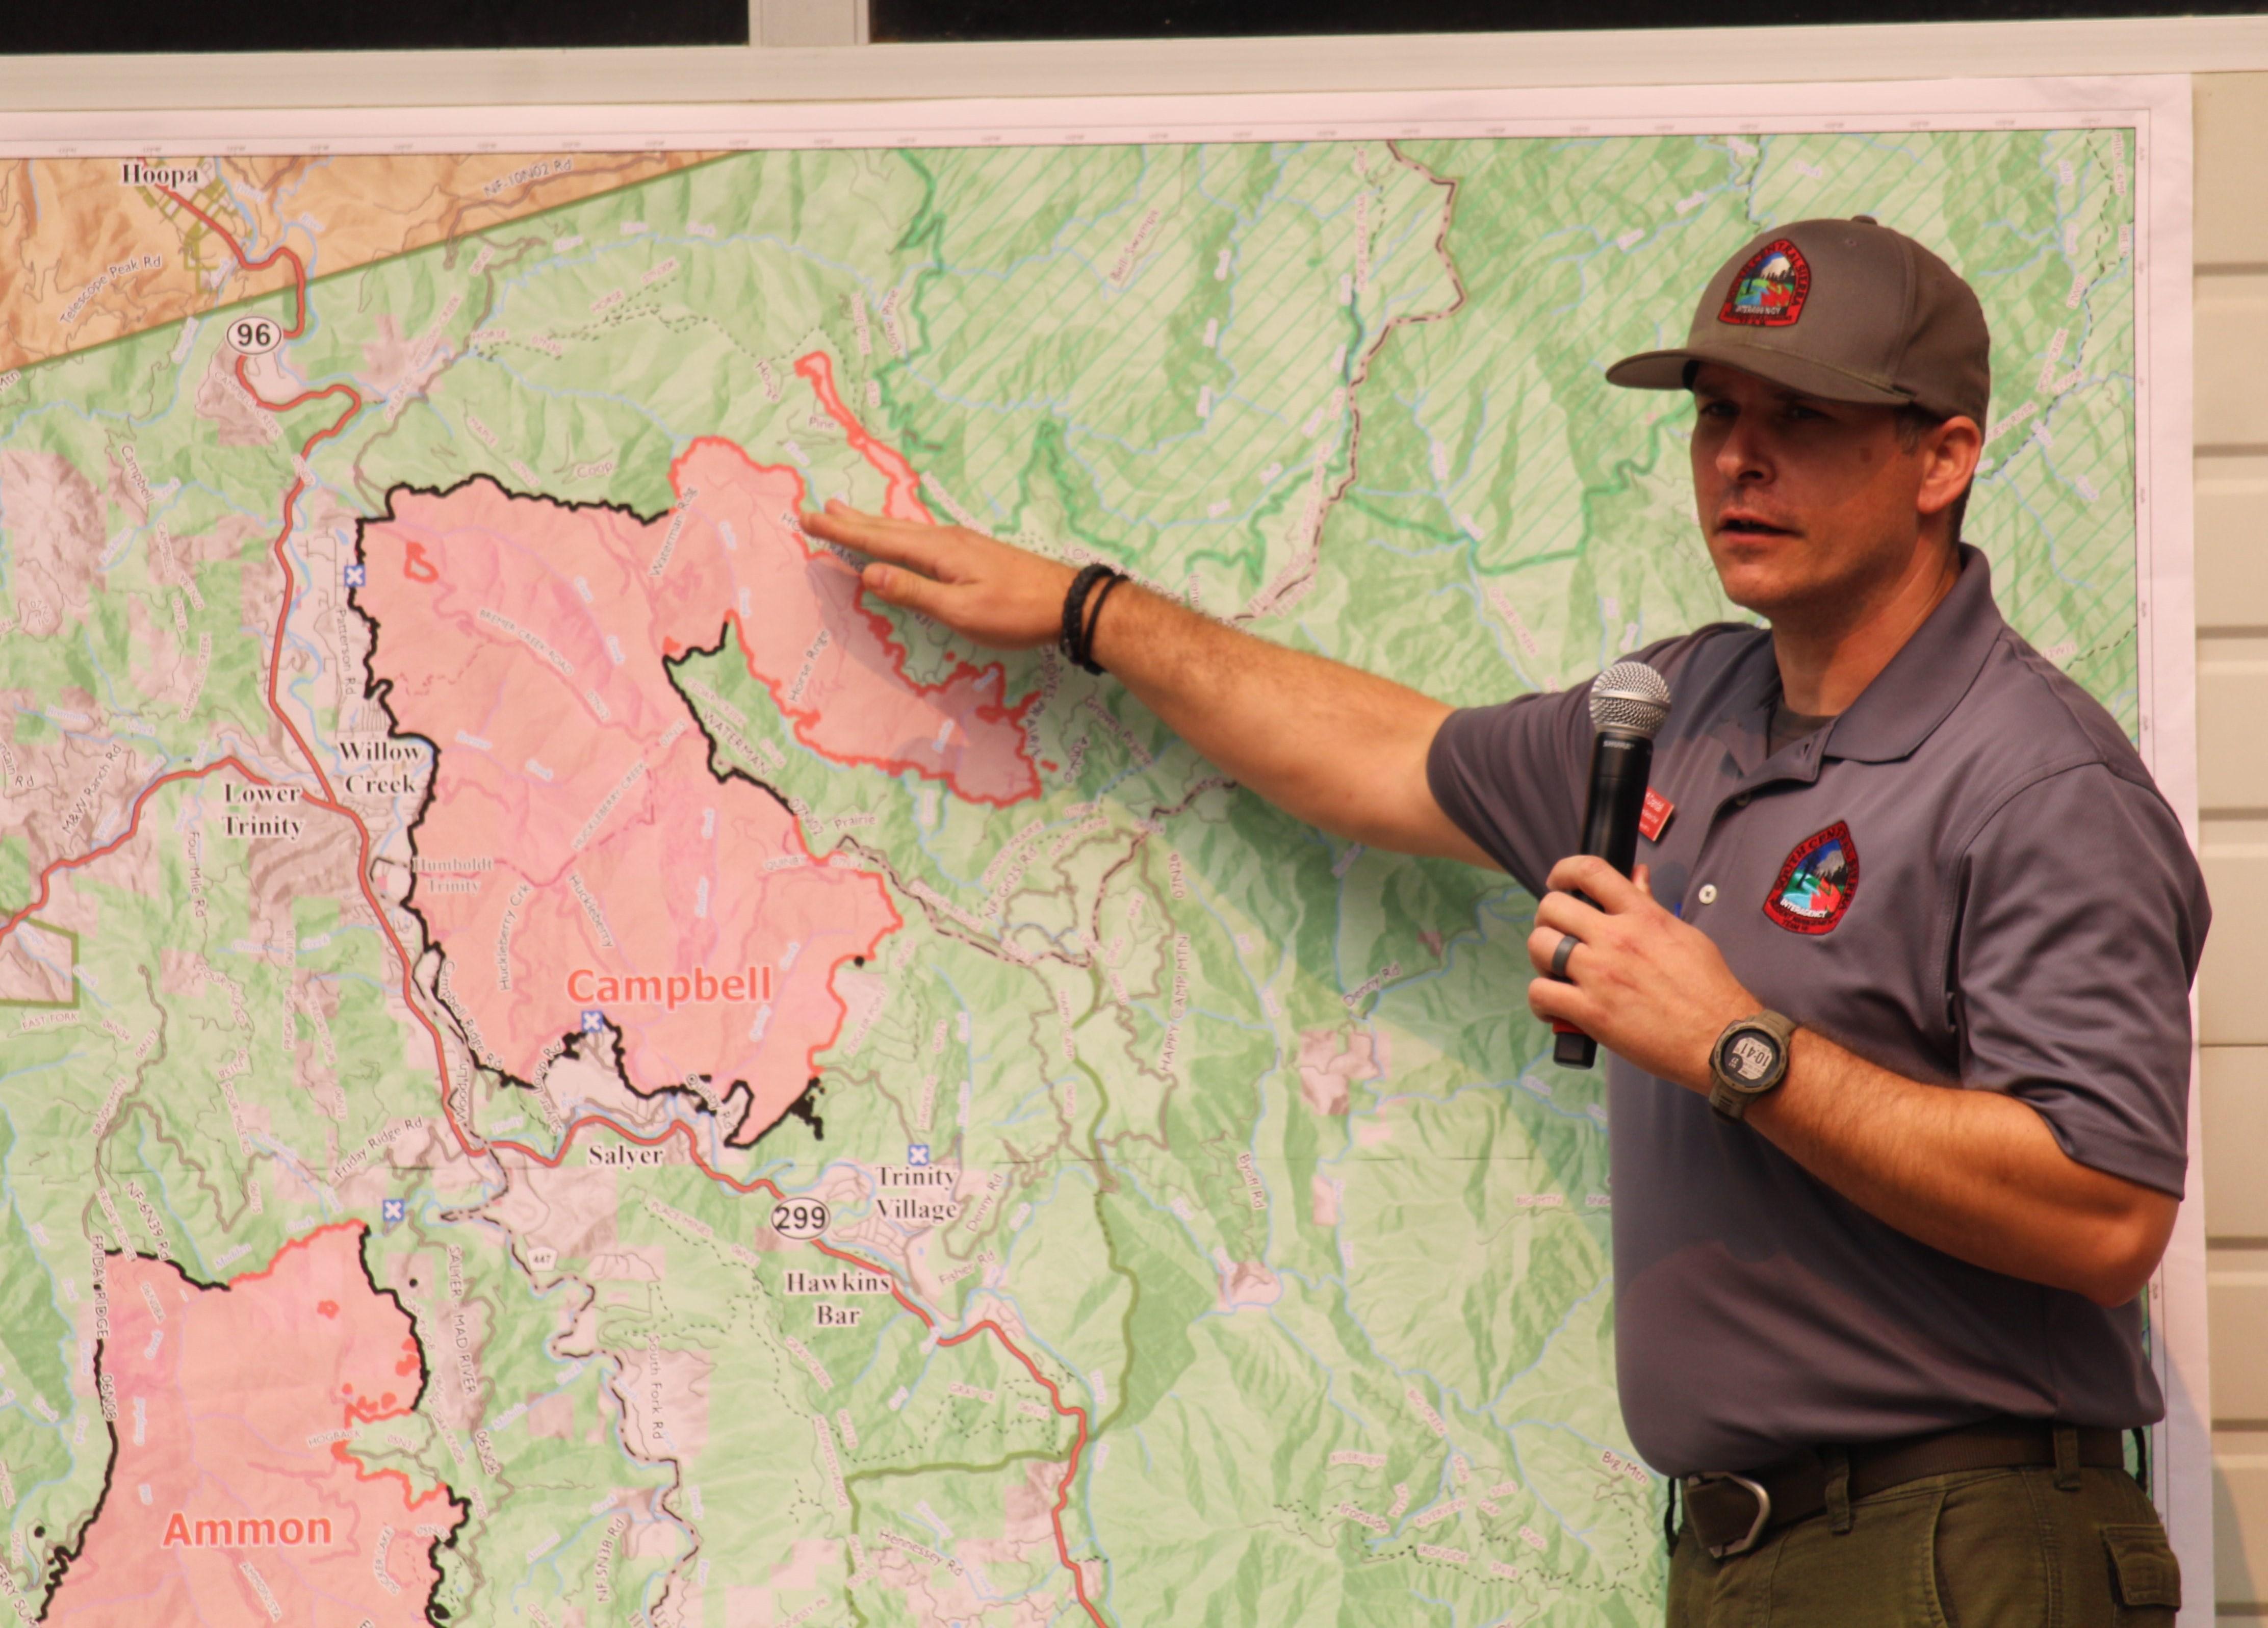 A man in a grey shirt and hat gestures to a map as he speaks into a microphone